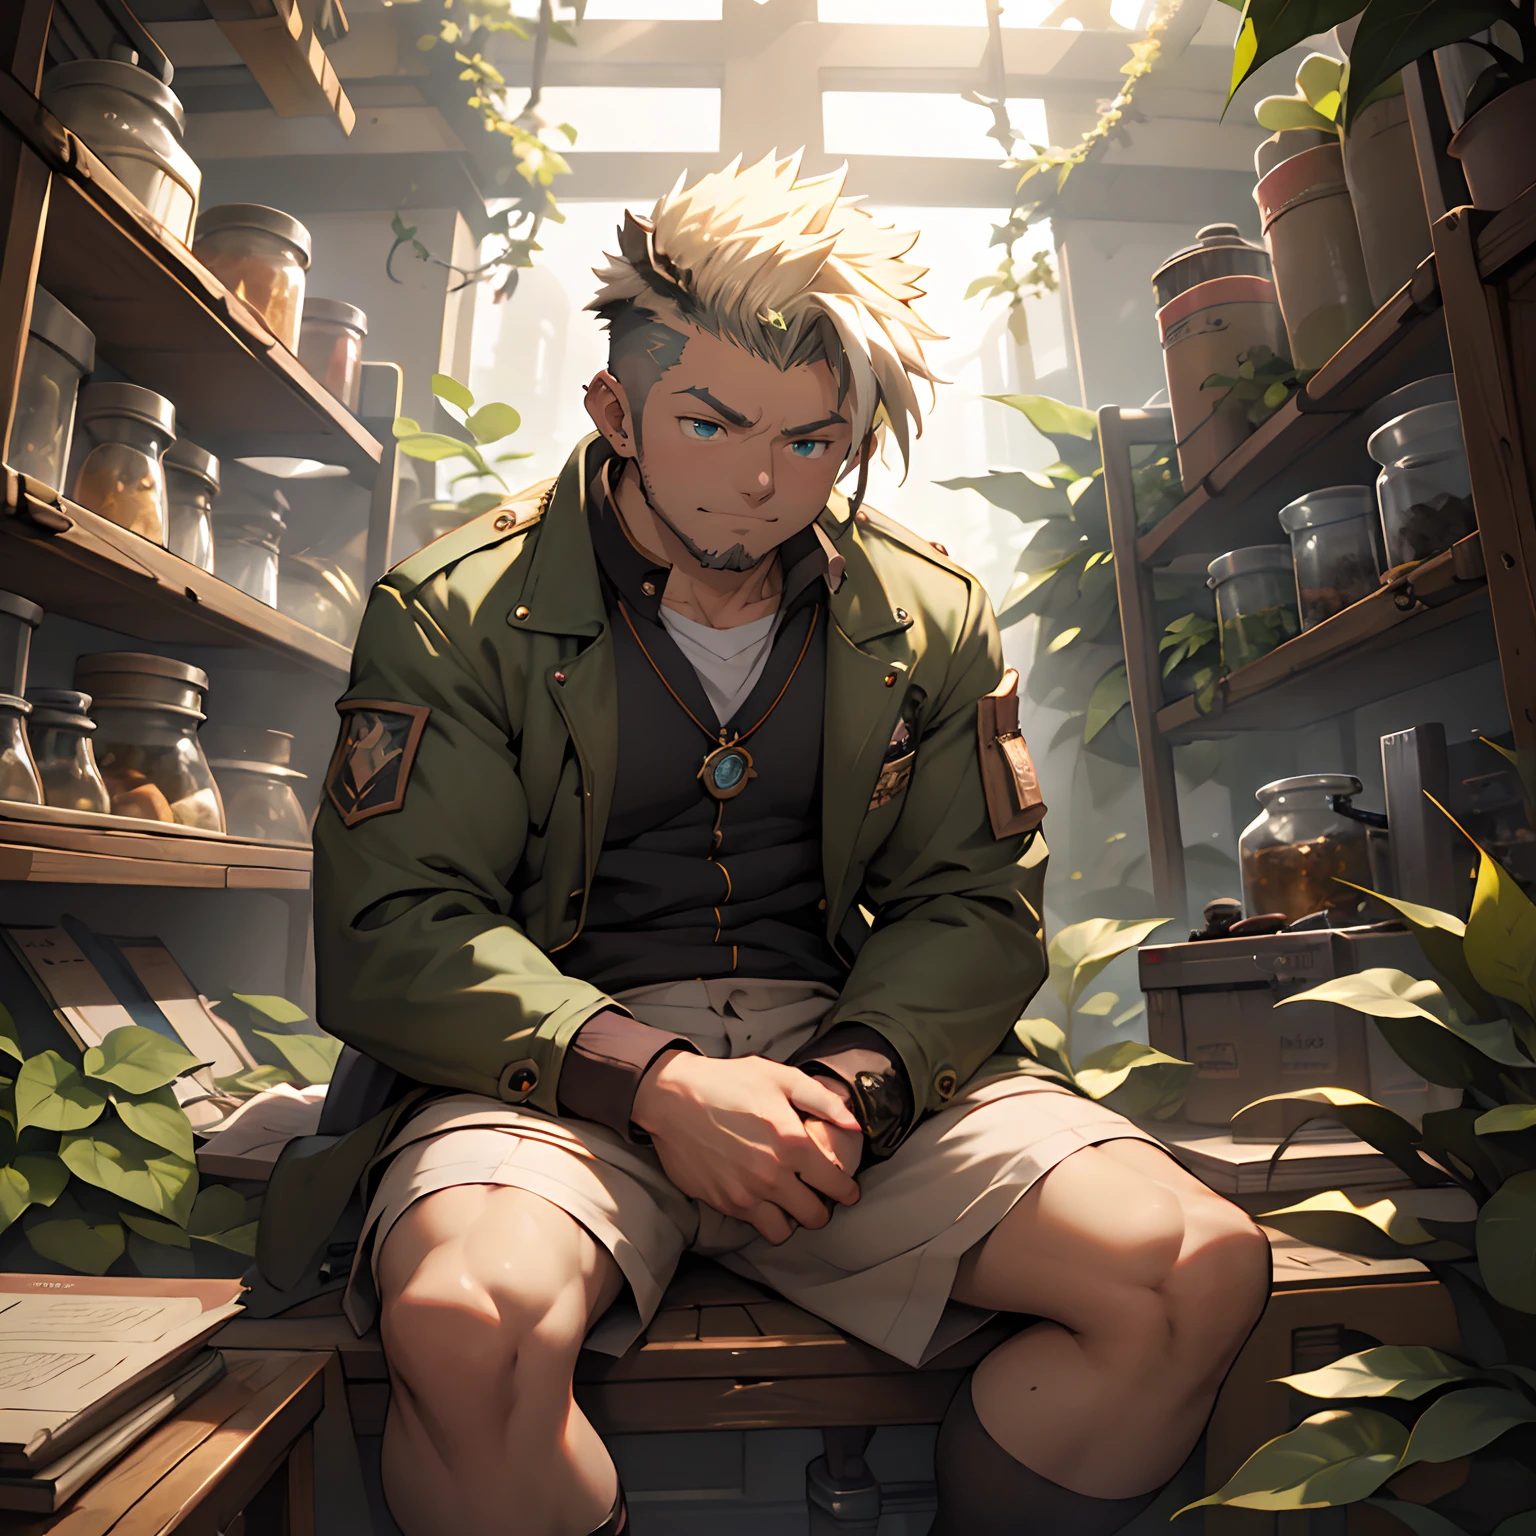 infinite mistletoe library covered ivy filled by grimoire flying leaf magically and ecosphere jar at alchemy laboratory black forest, super high resolution kawaii moe anime 8k, undercut, faux hawk, naked super buff muscular magician bent knees wear futuristic jacket on shirtless, spelling medicine hard tenting the crotch wood straddling the ecosphere jar with spread-eagle to manspreading over male seeds, rossdraws global illumination, trending on artstation pixiv, kawaii moe anime